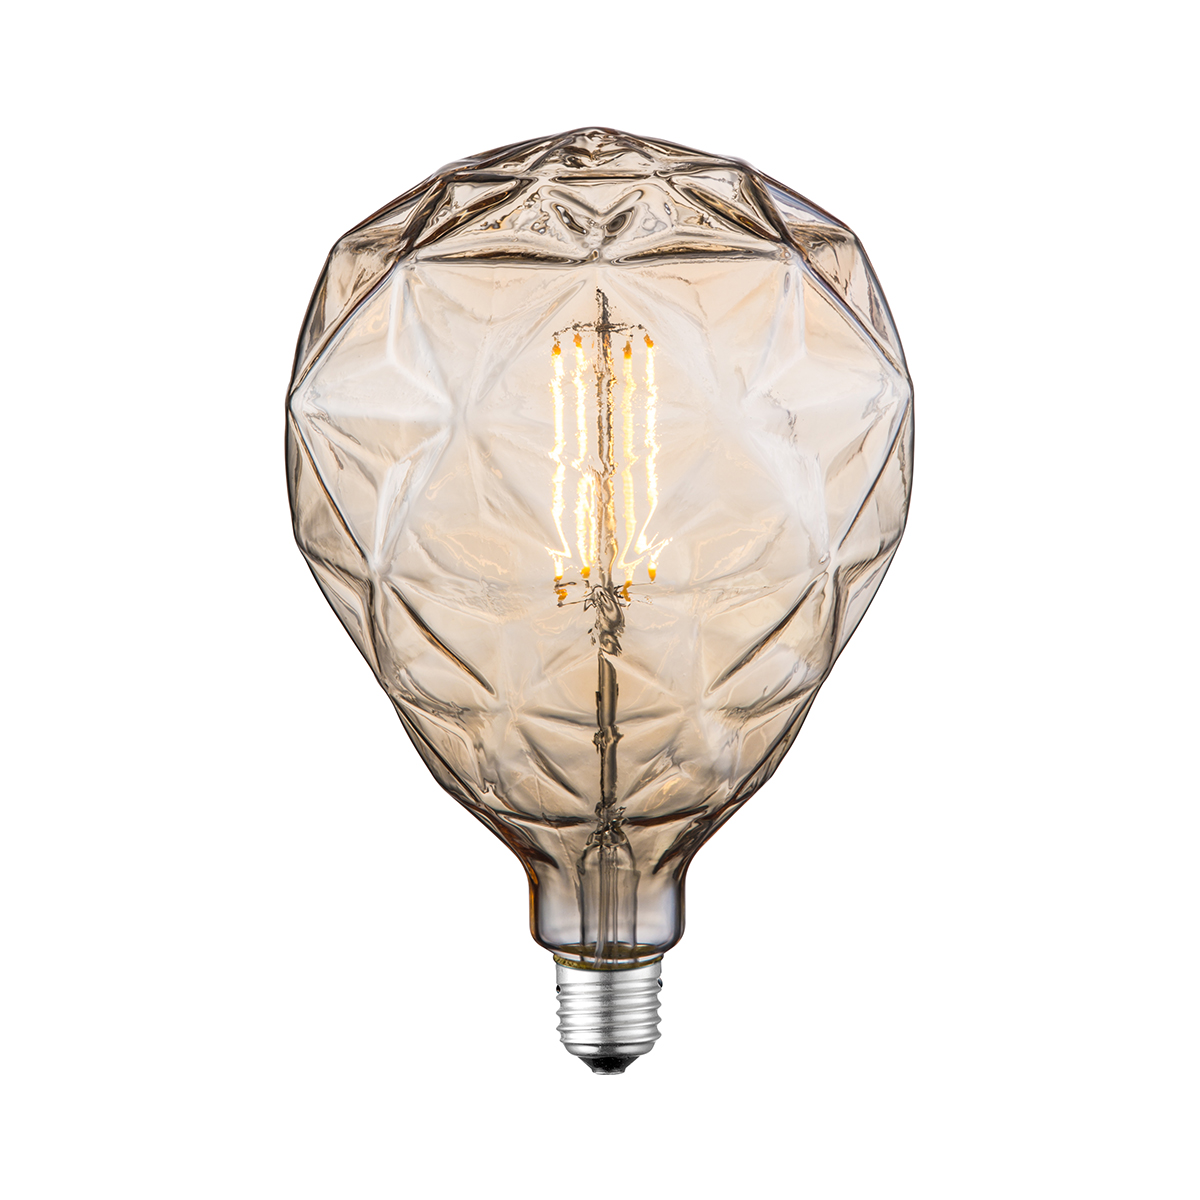 Tangla lighting - TLB-8114-04AM - LED Light Bulb Deco filament - special 4W amber - polytop - dimmable - E27